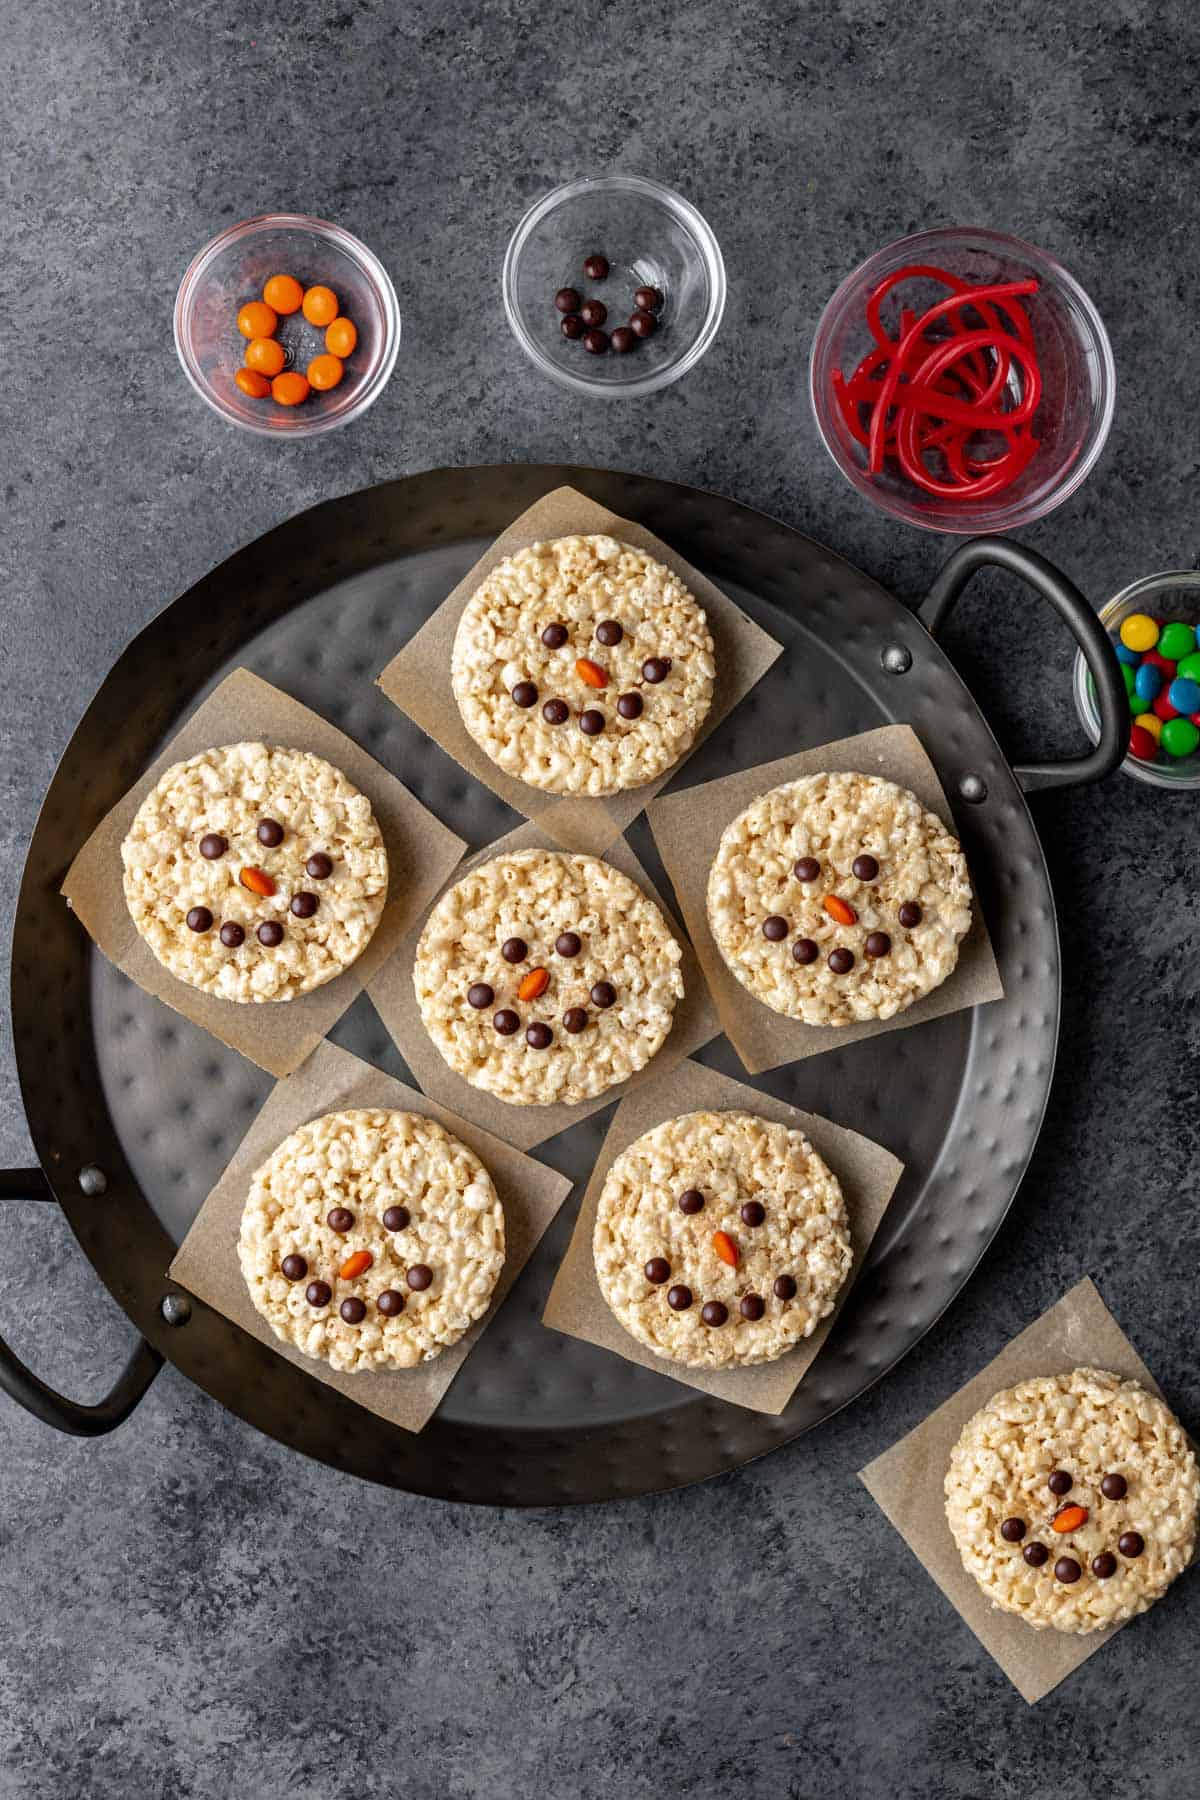 Snowman rice krispie treats with brown candy eyes and smiley faces and orange candy noses.